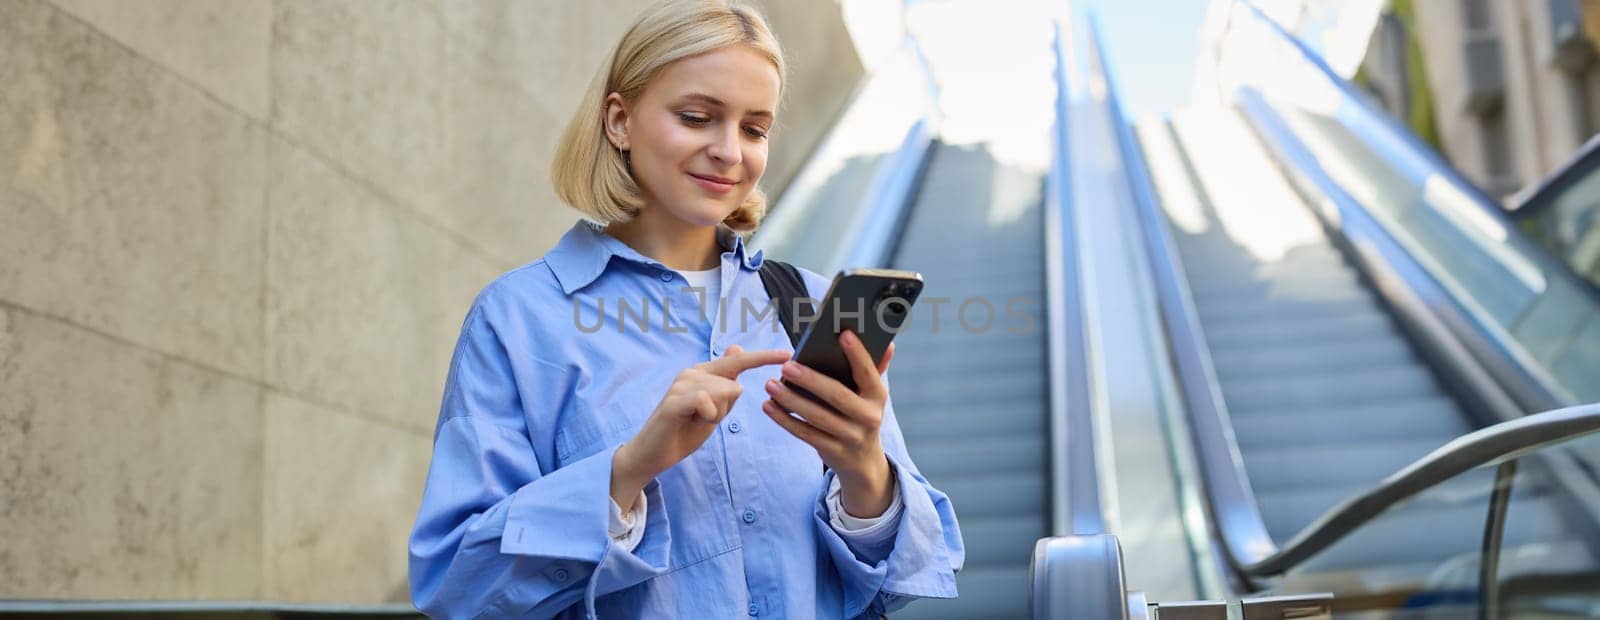 Portrait of young stylish woman, female employee, standing near escalator, using mobile phone, sending message on smartphone, tap screen, smiling and reading on telephone.